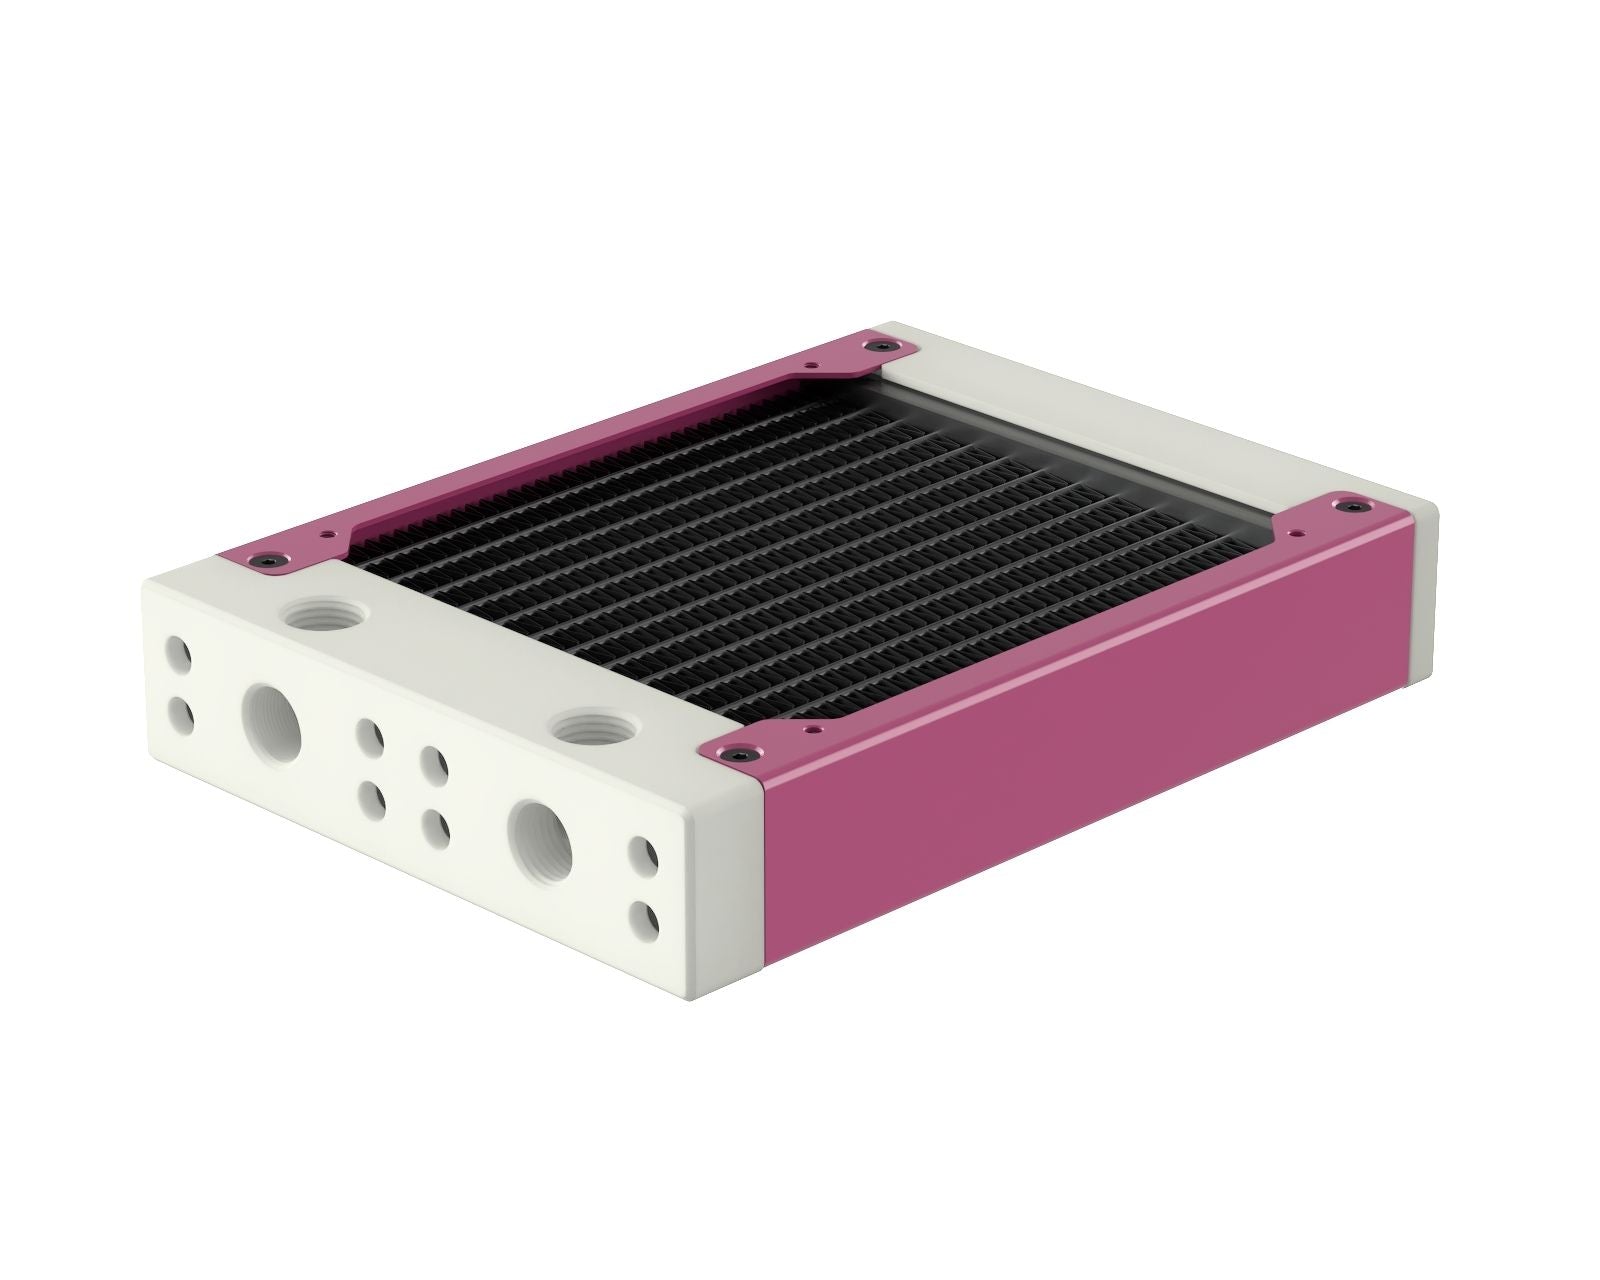 PrimoChill 120SL (30mm) EXIMO Modular Radiator, White POM, 1x120mm, Single Fan (R-SL-W12) Available in 20+ Colors, Assembled in USA and Custom Watercooling Loop Ready - Magenta